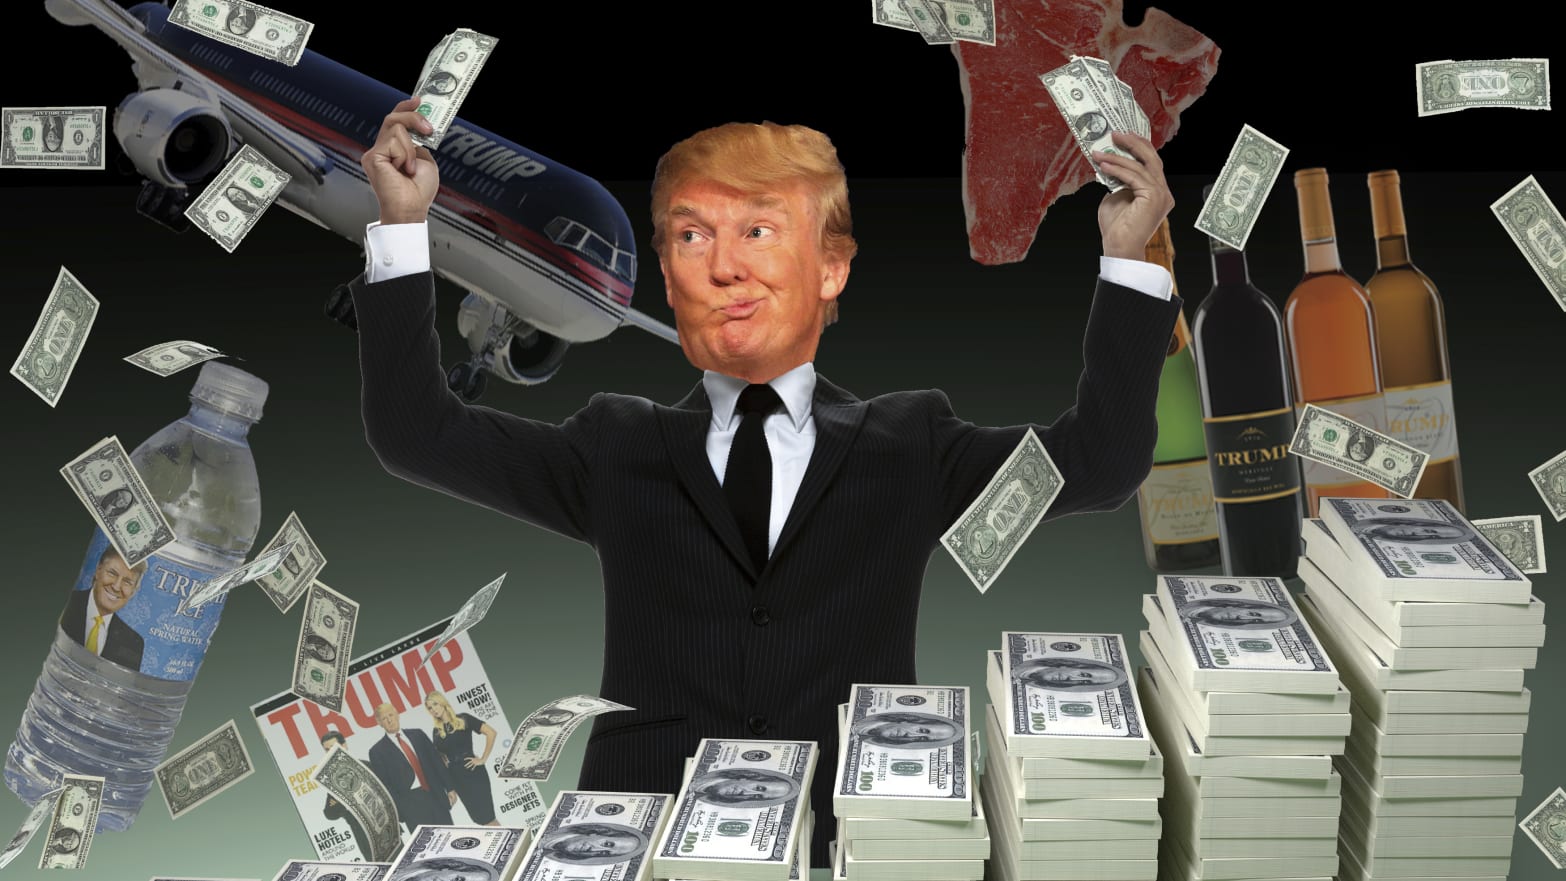 A Brief History of Donald Trump's Get-Rich Schemes